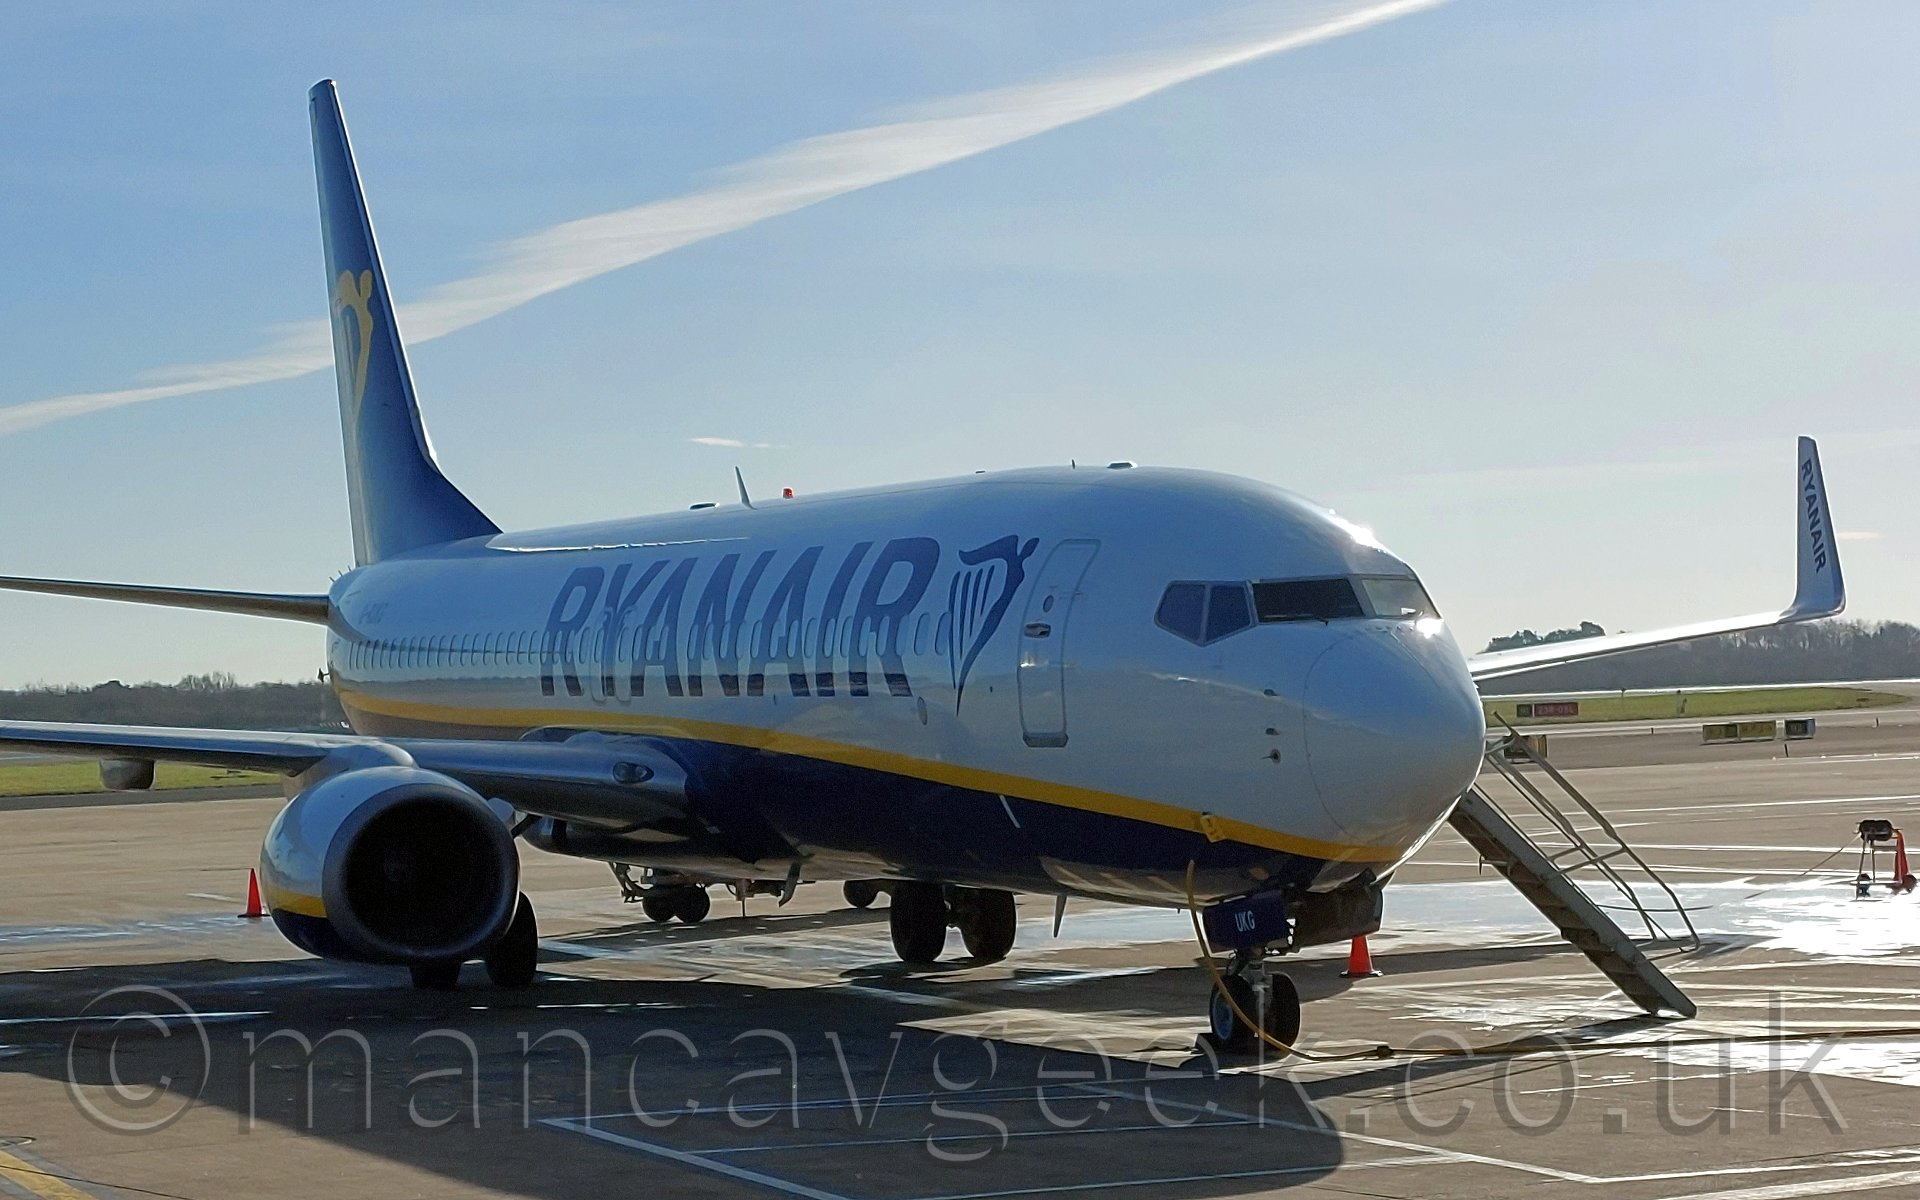 Slight side view of a twin engined jet airliner parked almost nose on to the camera, pointing slightly off to the right. The plane is mostly white, with a dark blue belly, with a thin yellow line seperating the 2 sections. There are large, dark blue "Ryanair" titles on the forward fuselage, next to a dark blue winged Irish harp, the same harp being on the dark blue tail in yellow. There is a built in set of stairs coming from the forward door on the other side of the plane., and a thick yellow cable plugged into a hatch in the planes nose, just forward of the nosewheel. Behind, trees mark the airfield perimeter, giving way to a bright blue sky with a single line of cloud. bright sunlight is coming from off to the right of the frame, casting strong shadows on the ground and leaving some of the planes edges sparkling. Not bad for a photo taken with a cellphone.